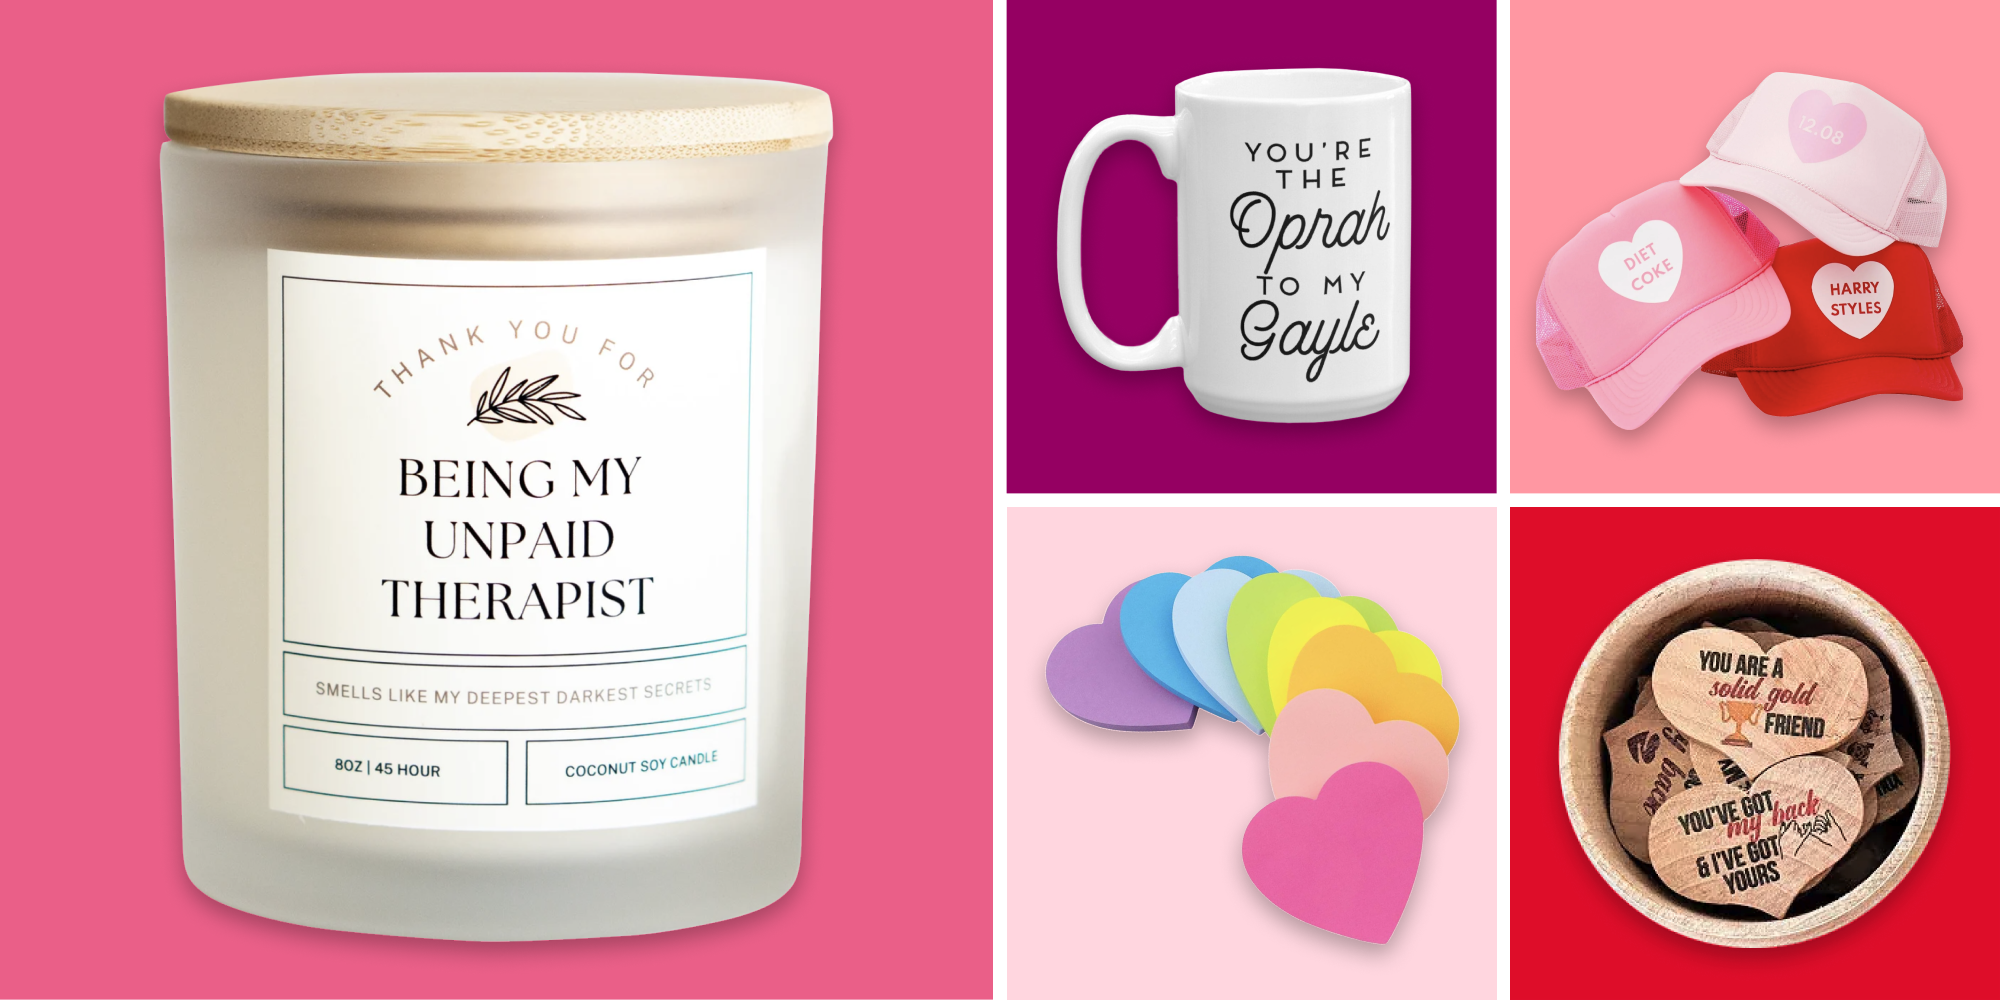 Memorable Gifts | Unique Gifts for Him| Cute Gifts for Her| His and Hers  Gifts| Cute Gifts | Birthday gifts for best friend, Cute gifts for her, Mugs